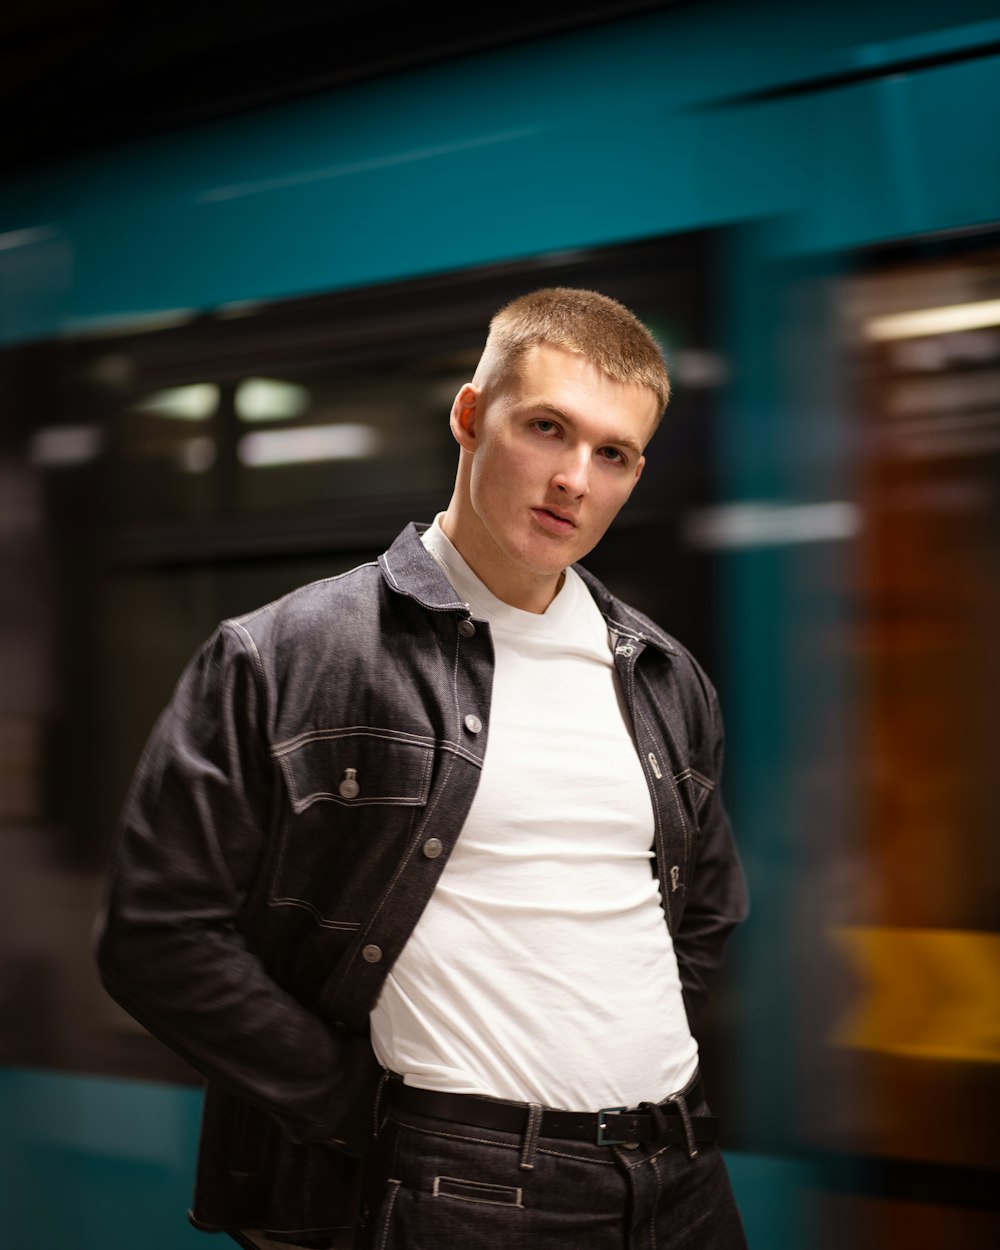 a young man standing in front of a train